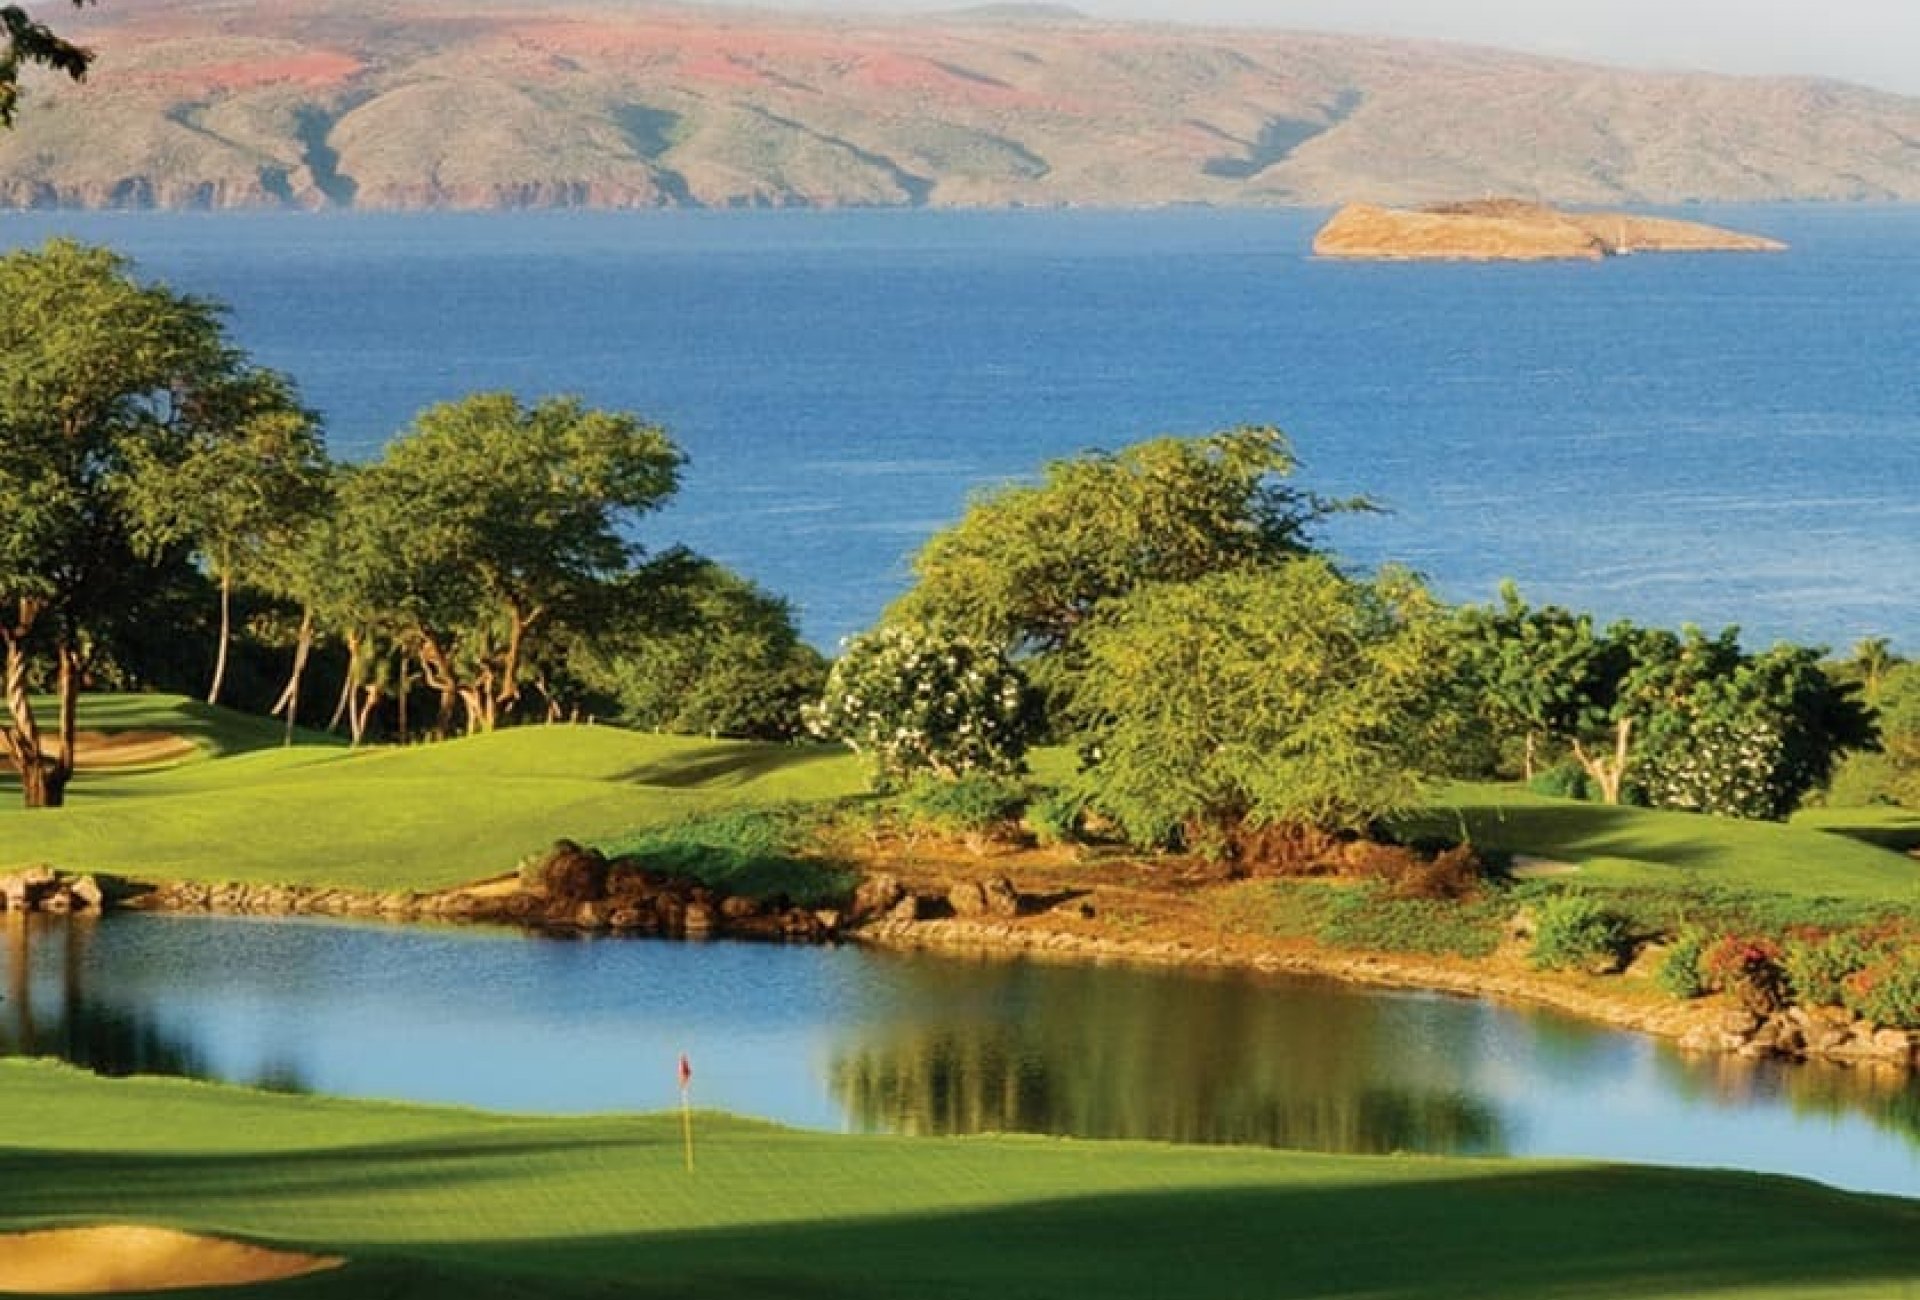 golf course sits on the edge of the ocean with the mountains in the background